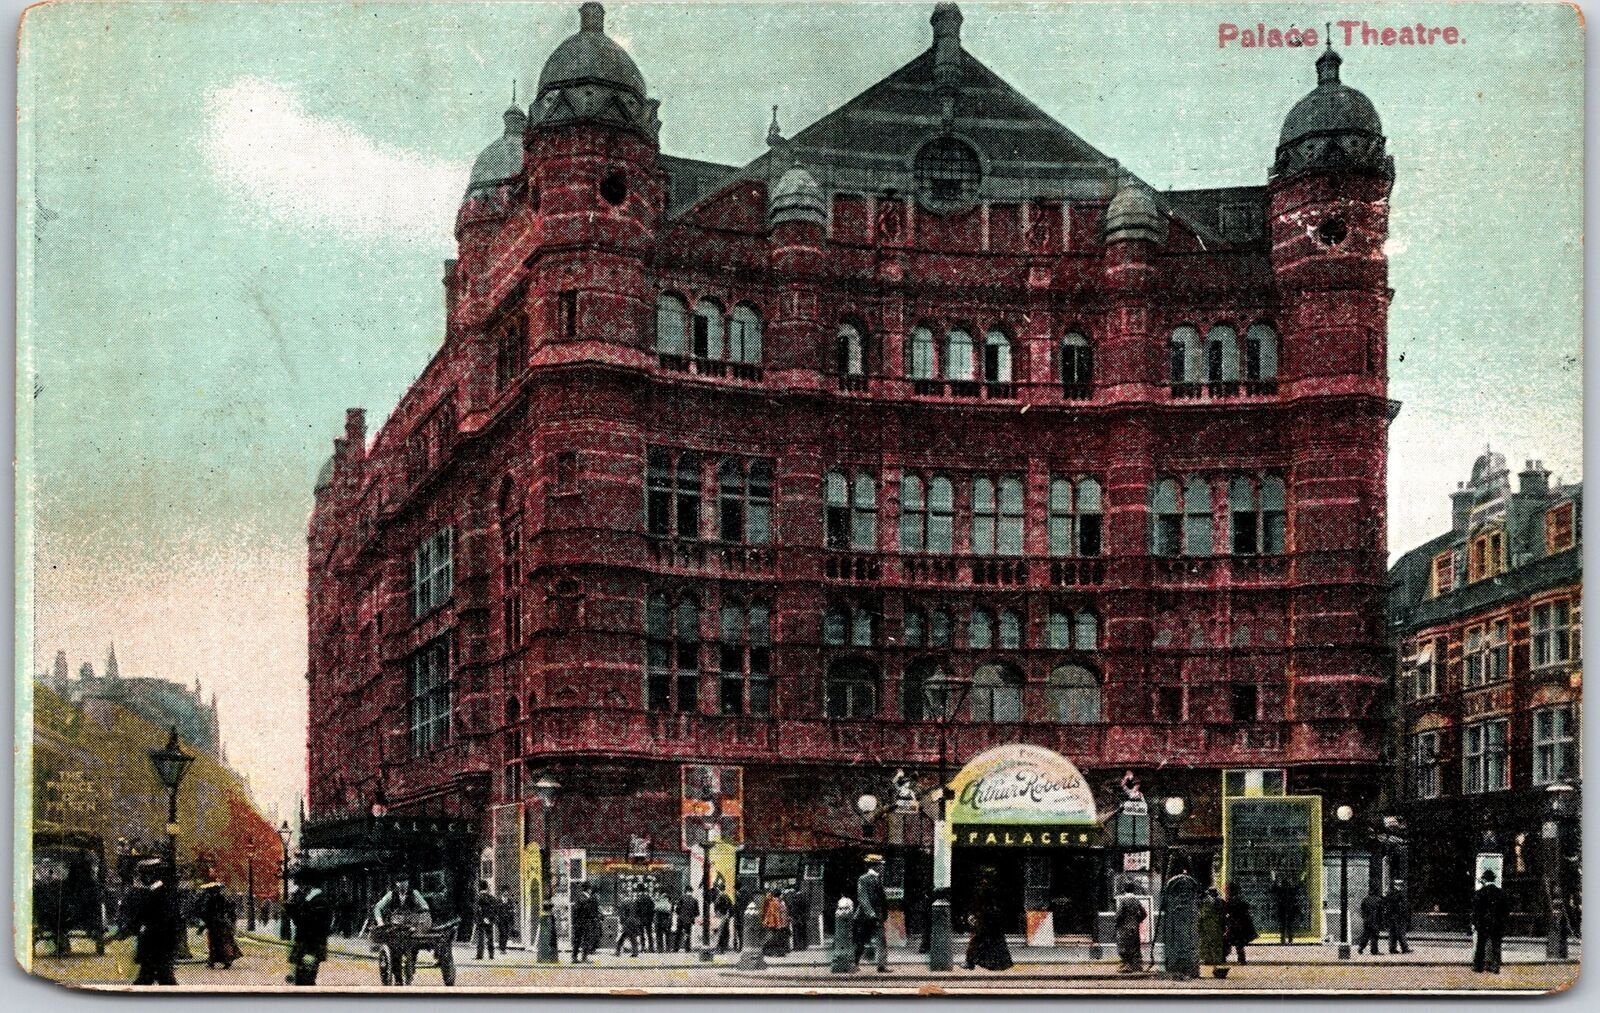 Palace Theatre London England Shaftesbury Avenue and Charing Cross Road Postcard